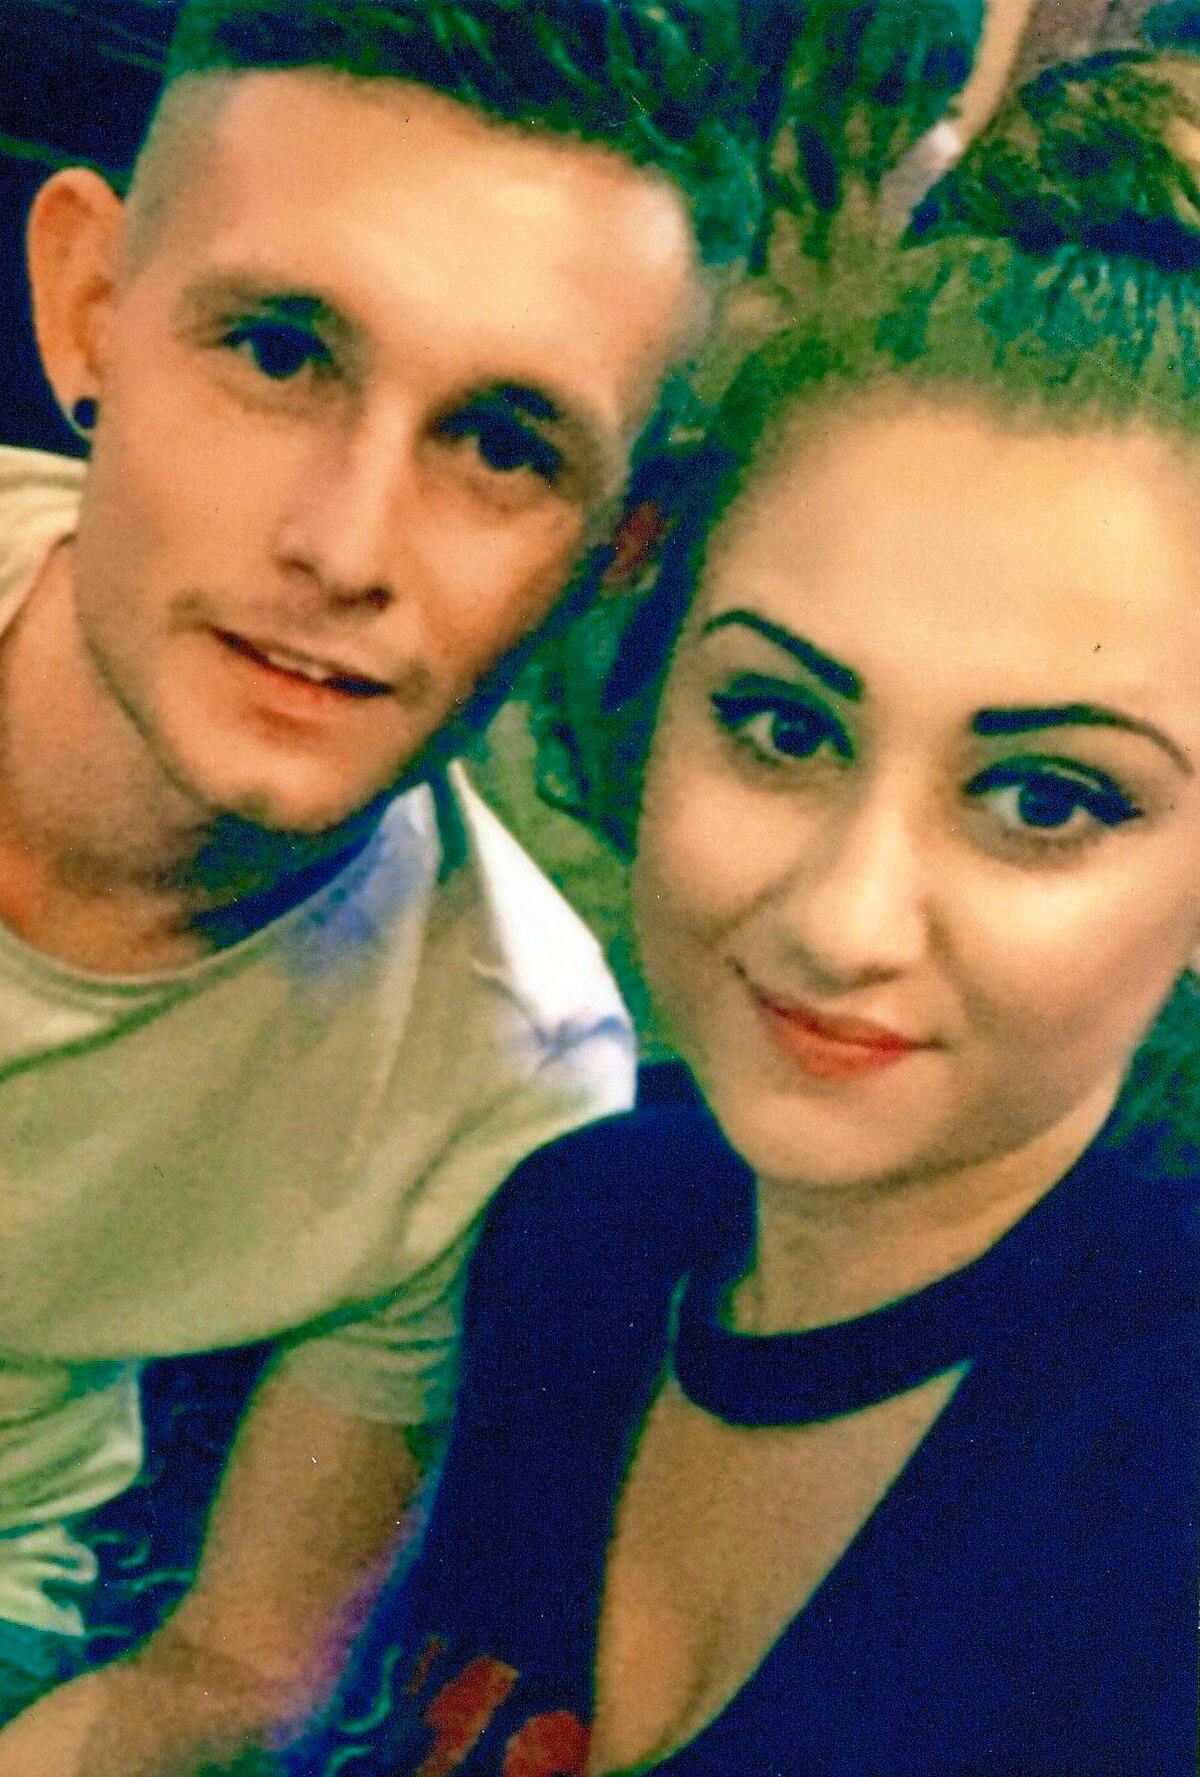 Ryan Passey, who was aged 24, with his girlfriend Paige Marsh-Roberts, 19